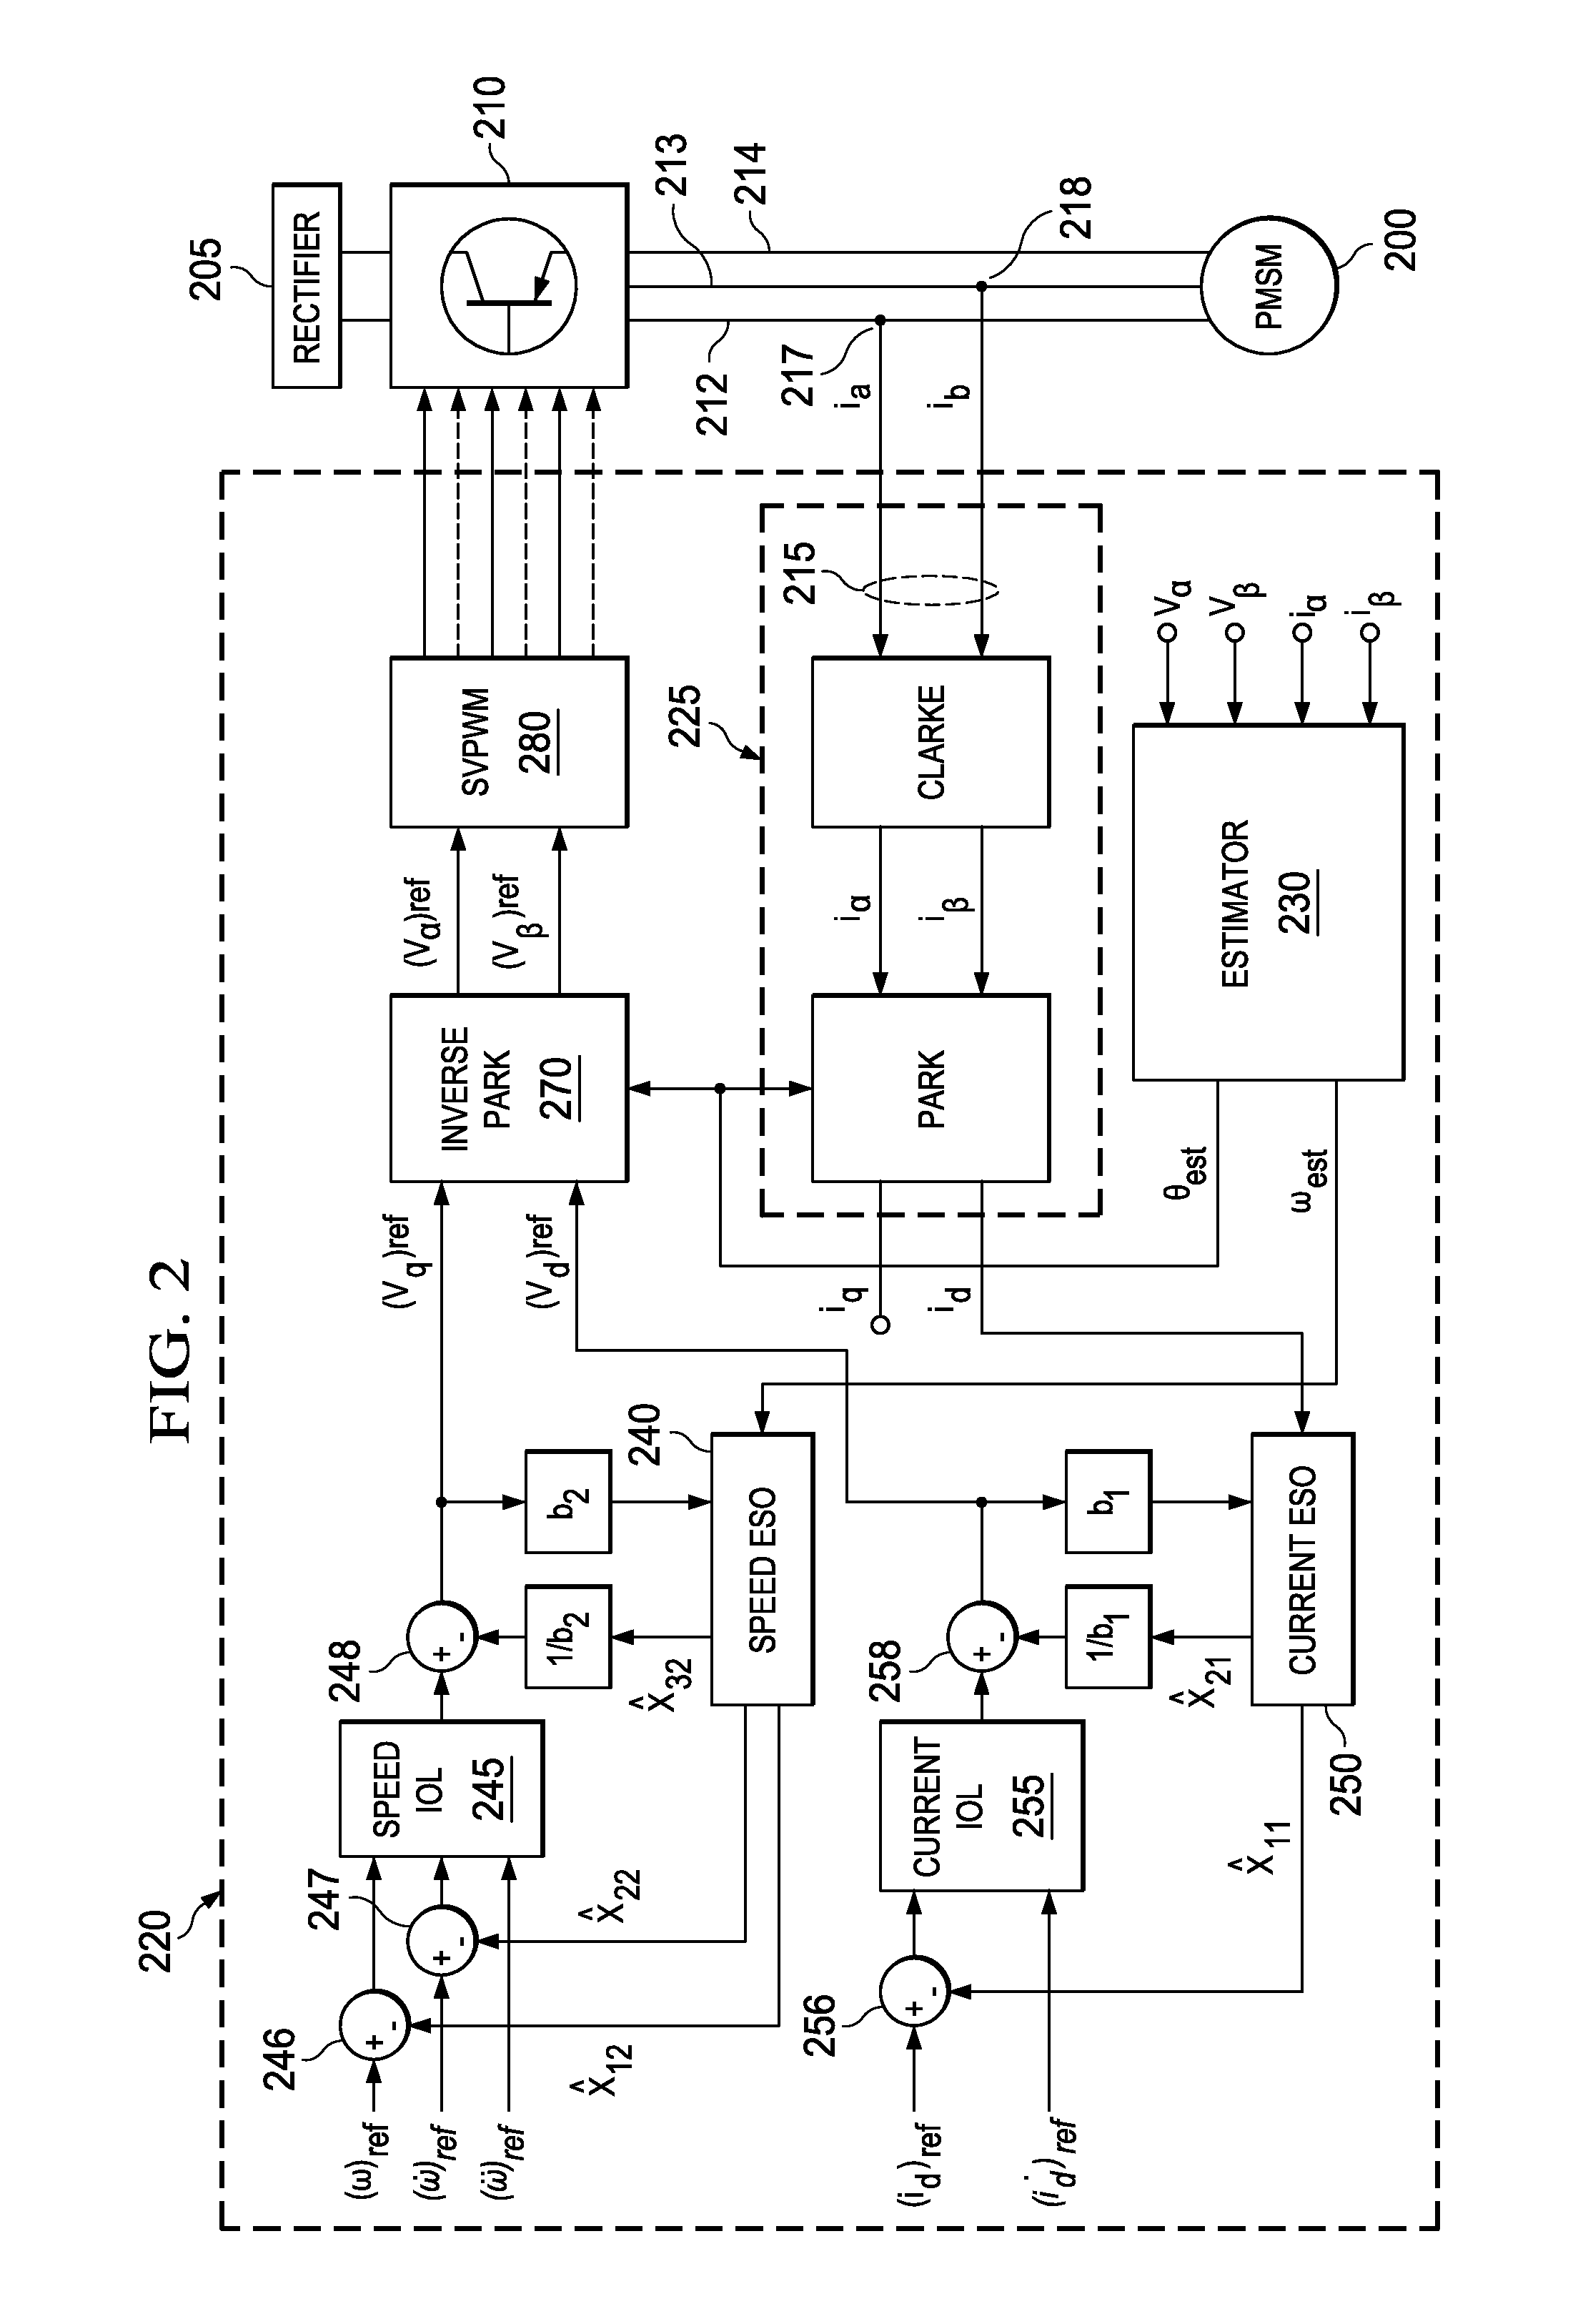 Automated Motor Control